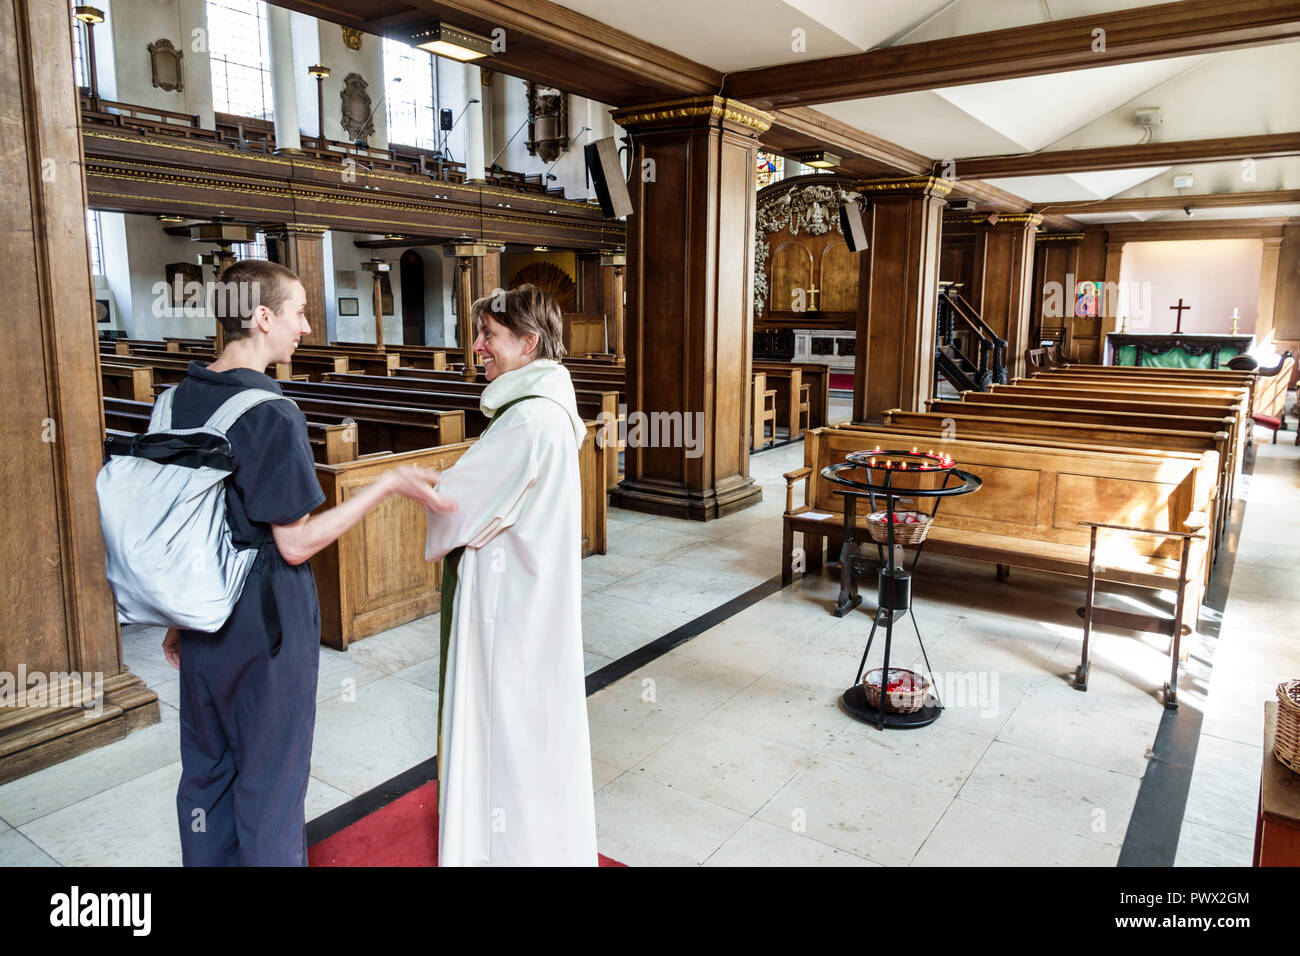 Londra Inghilterra,UK,West End St James's Piccadilly Church,St James-in-the-Fields,Anglican Church Parish,interior Inside,Rettore,donna femminile,talkin Foto Stock